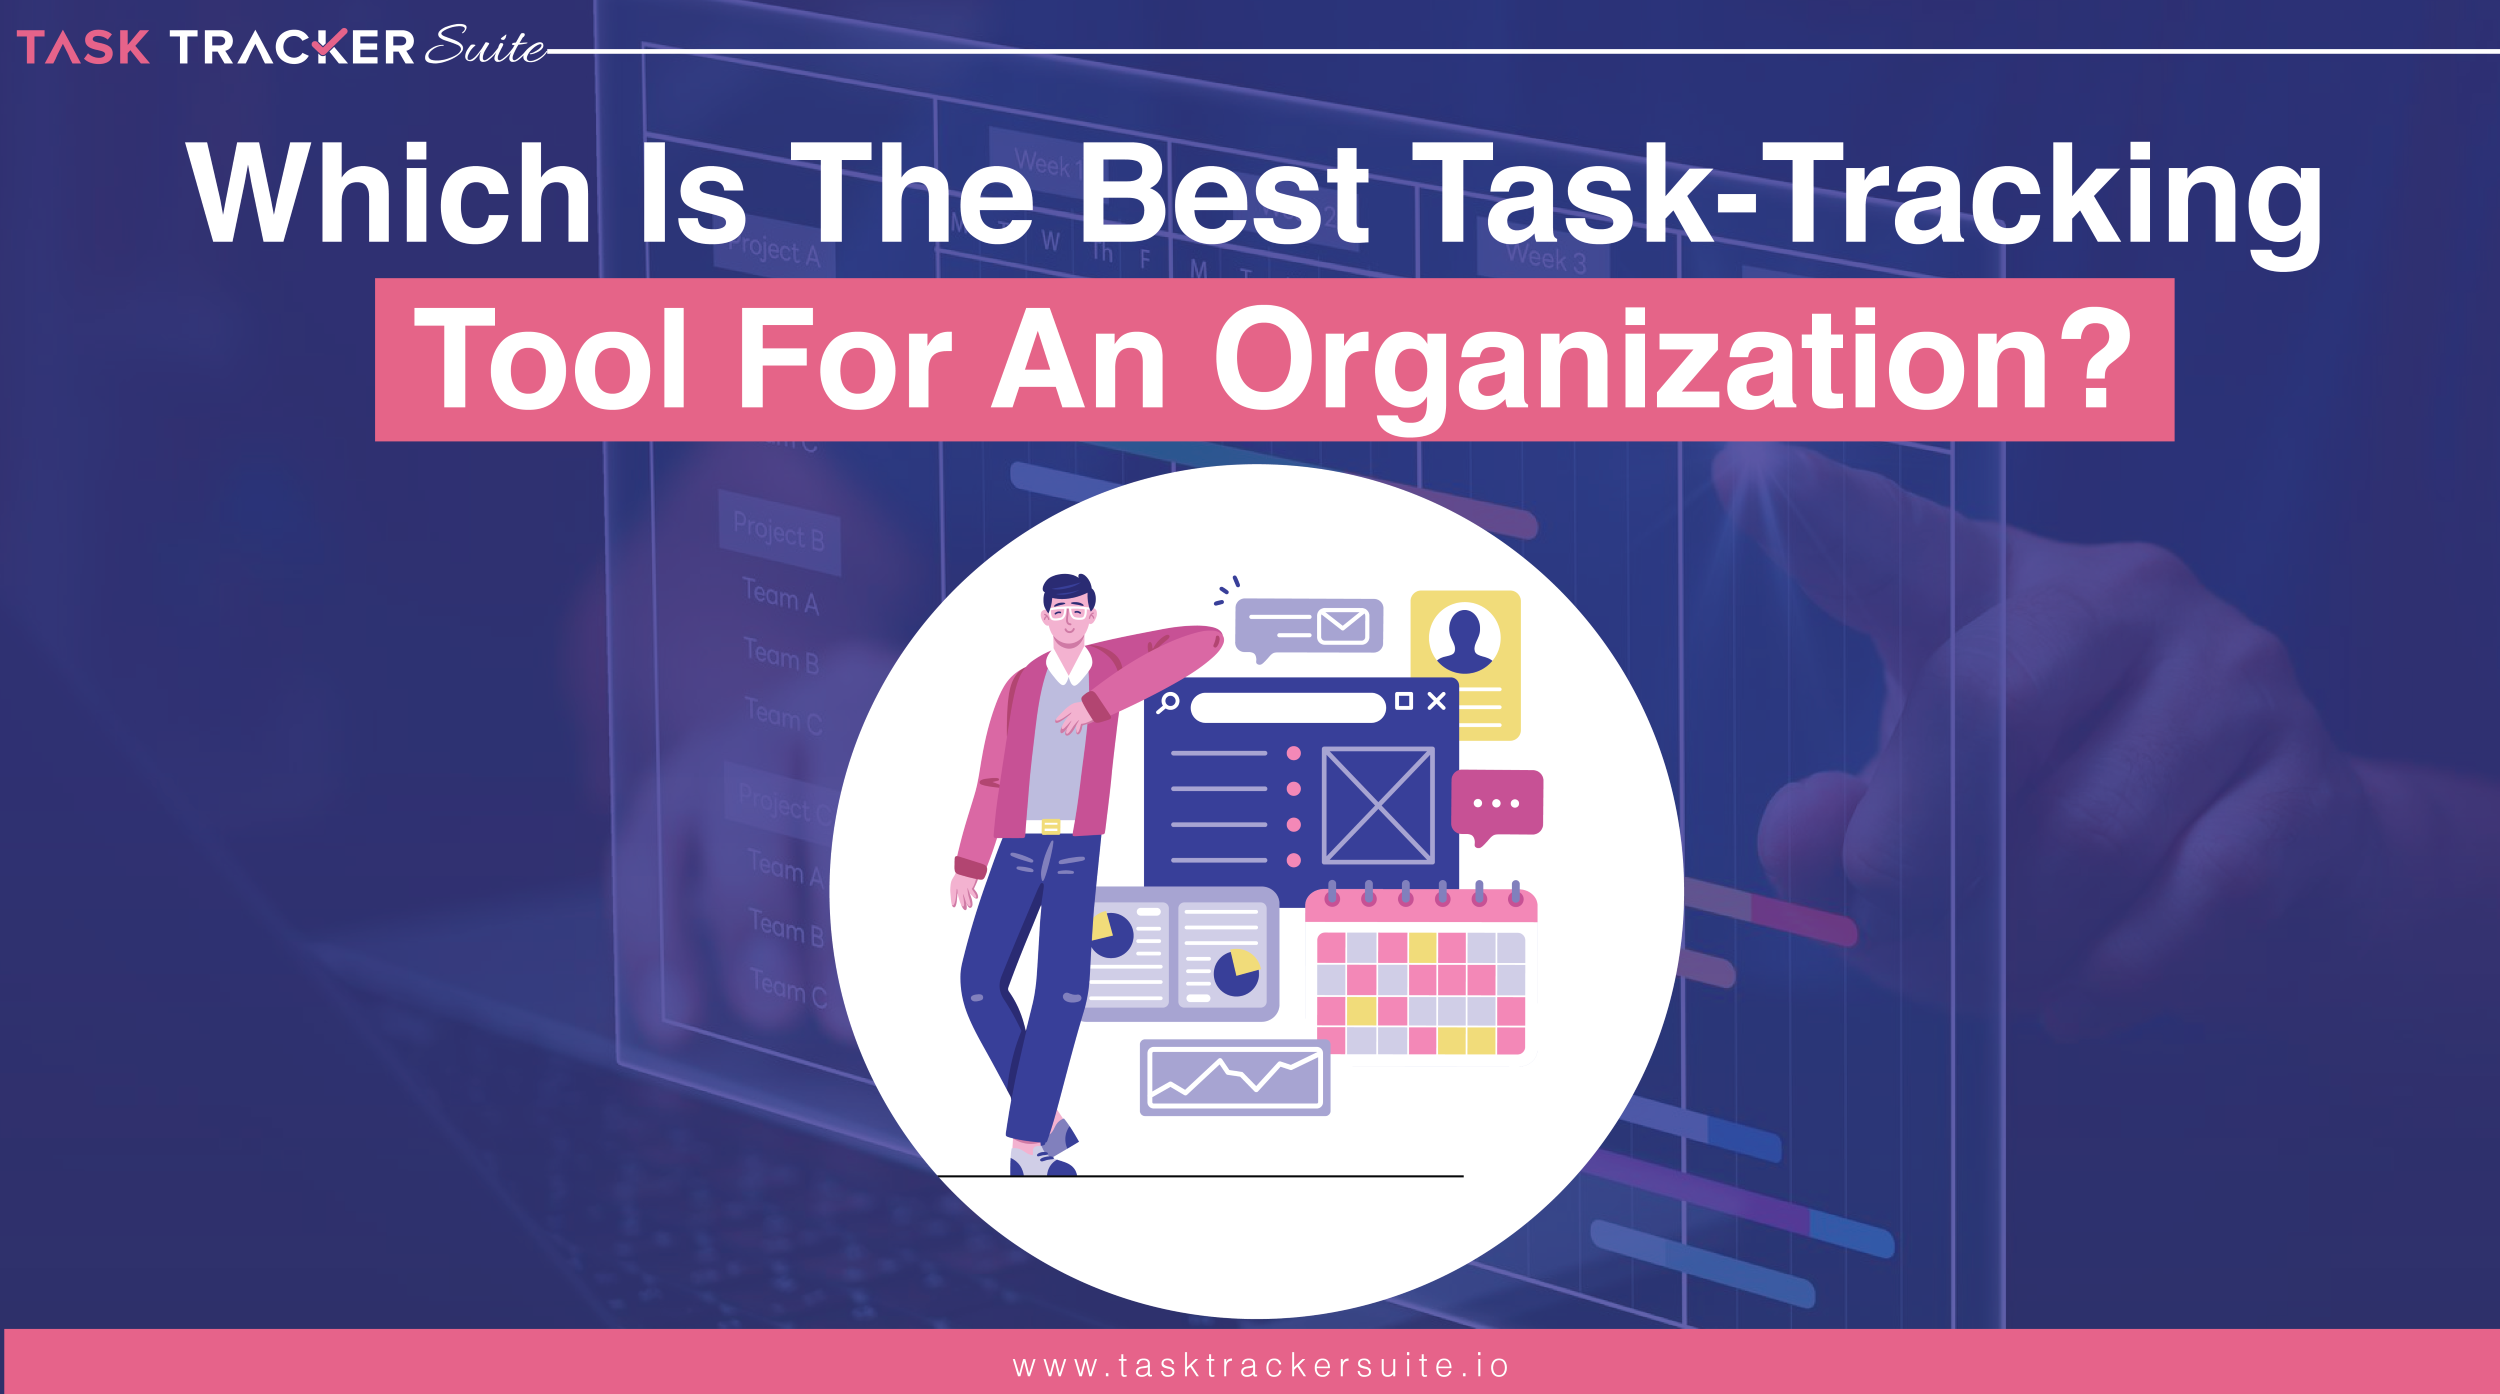 Which Is The Best Task-Tracking Tool For An Organization?